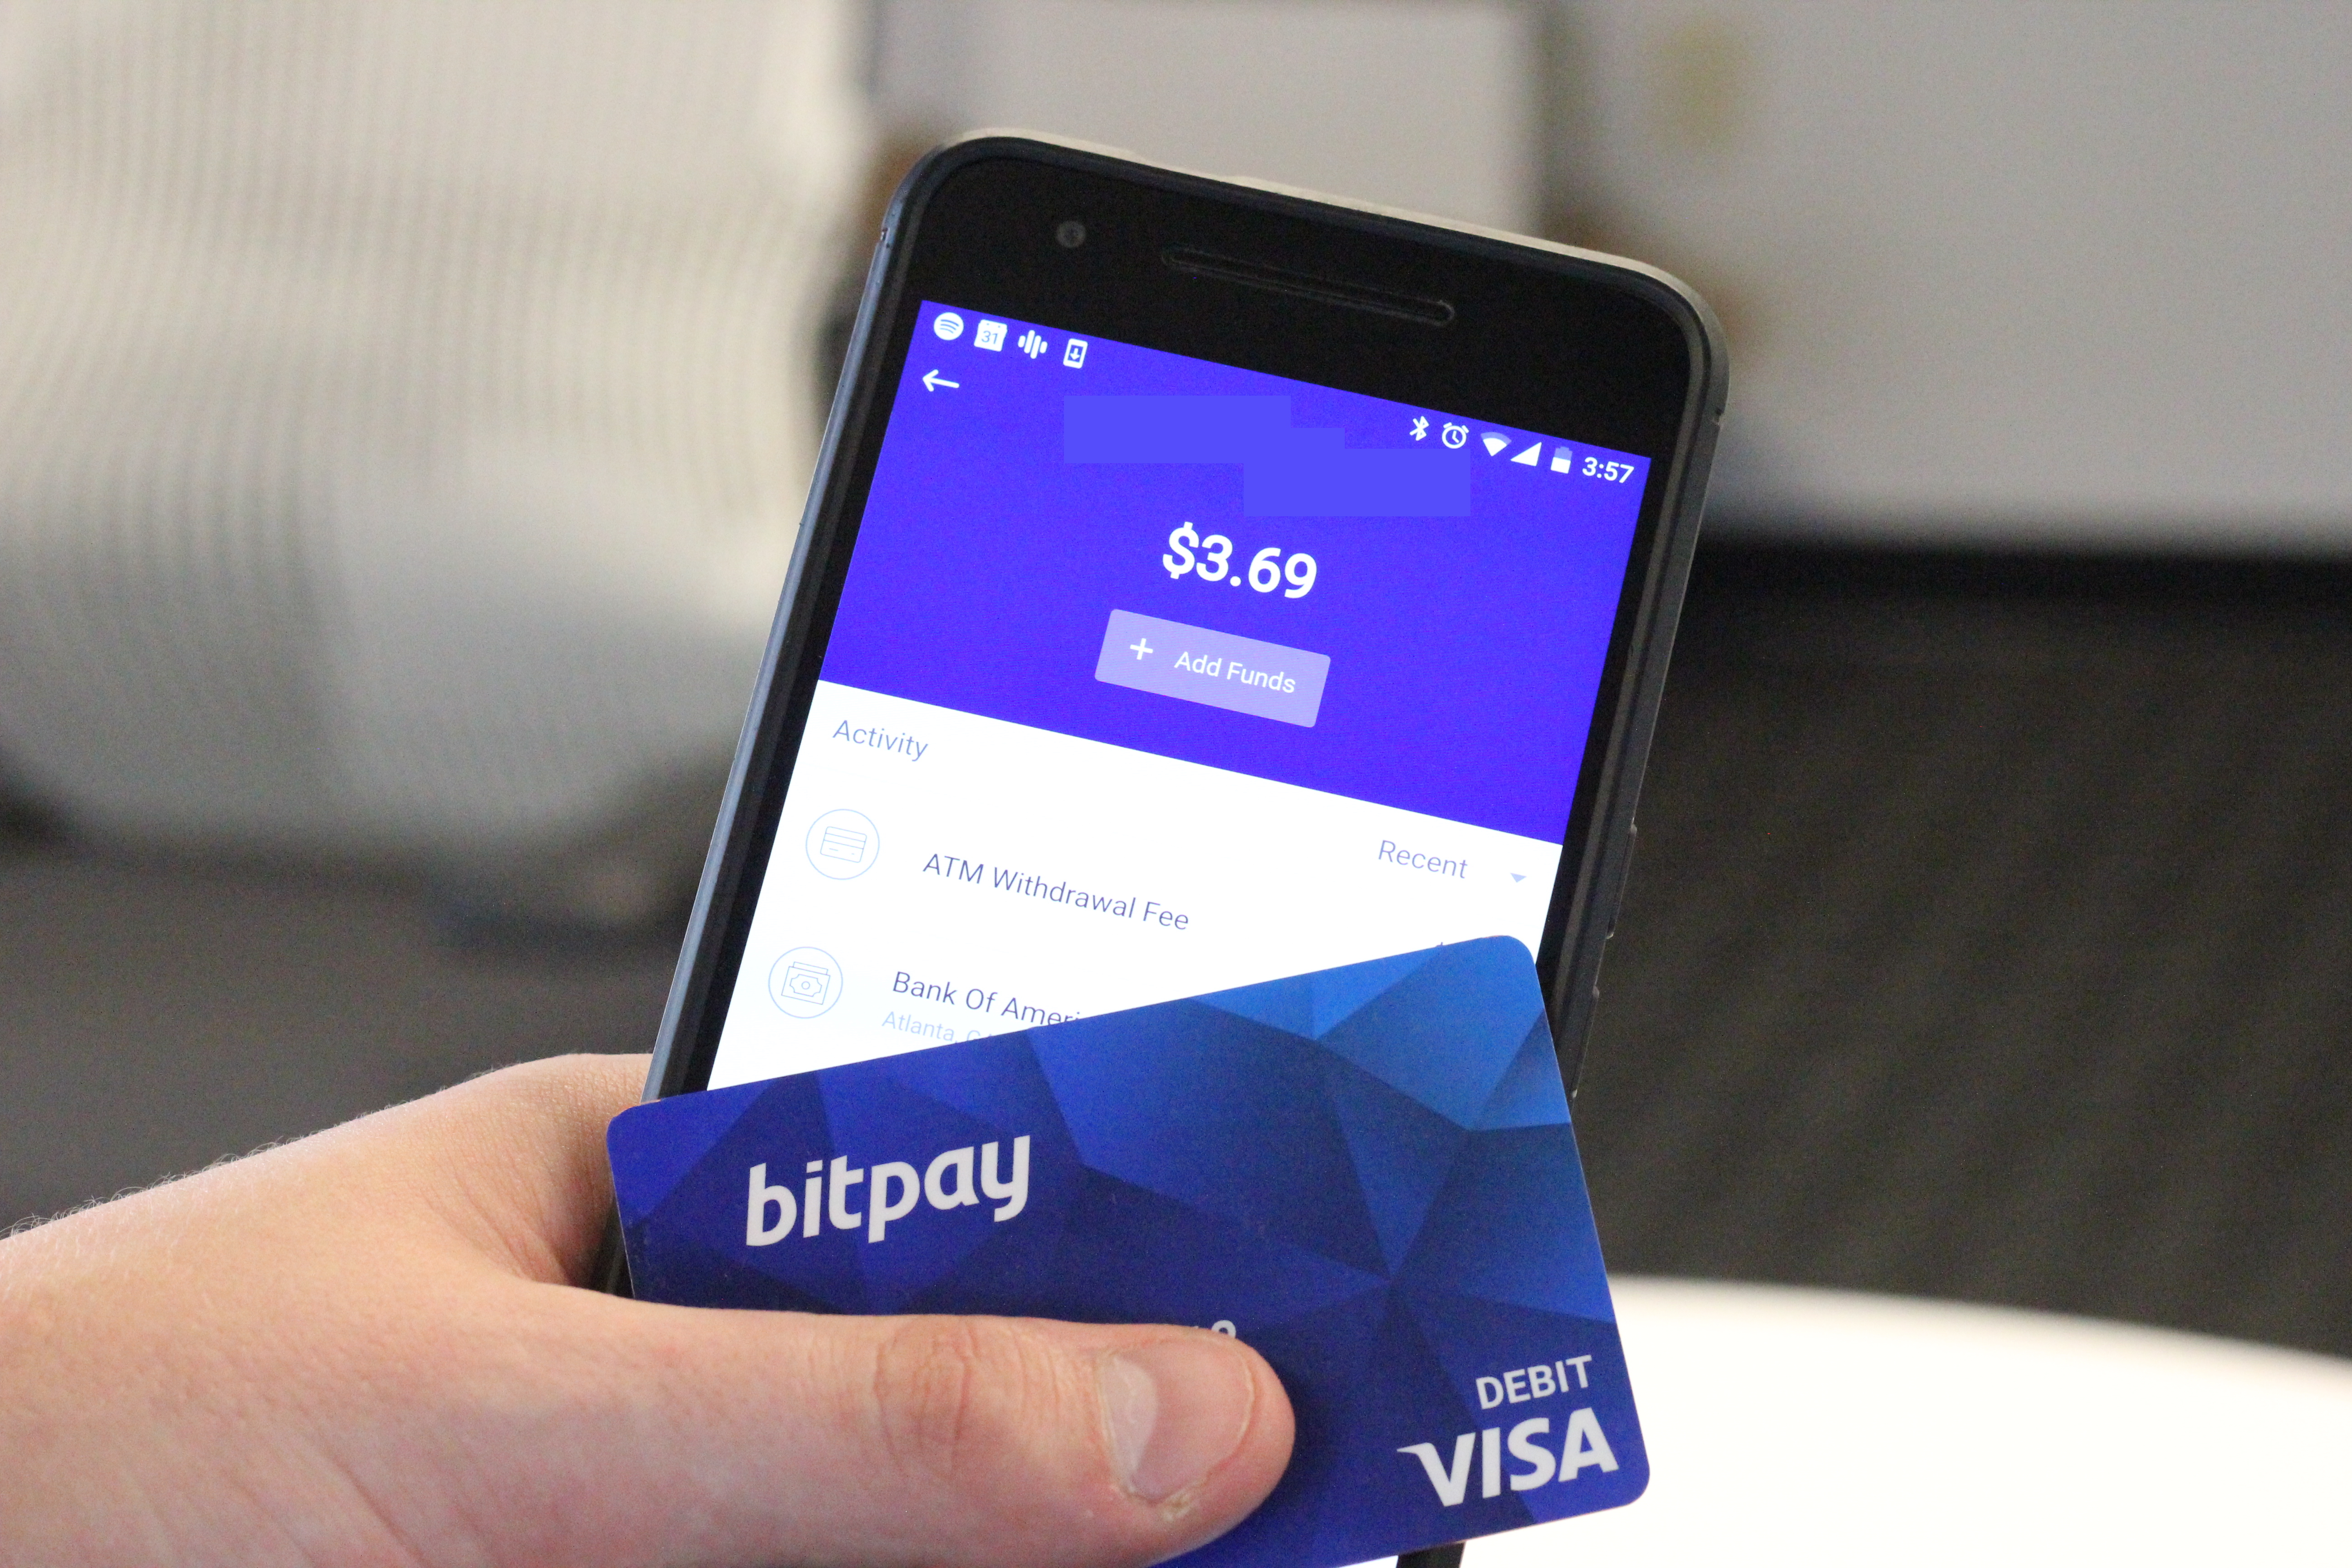 BitPay’s Bitcoin Payments Volume Grows by 328%, On Pace for $1 Billion Yearly